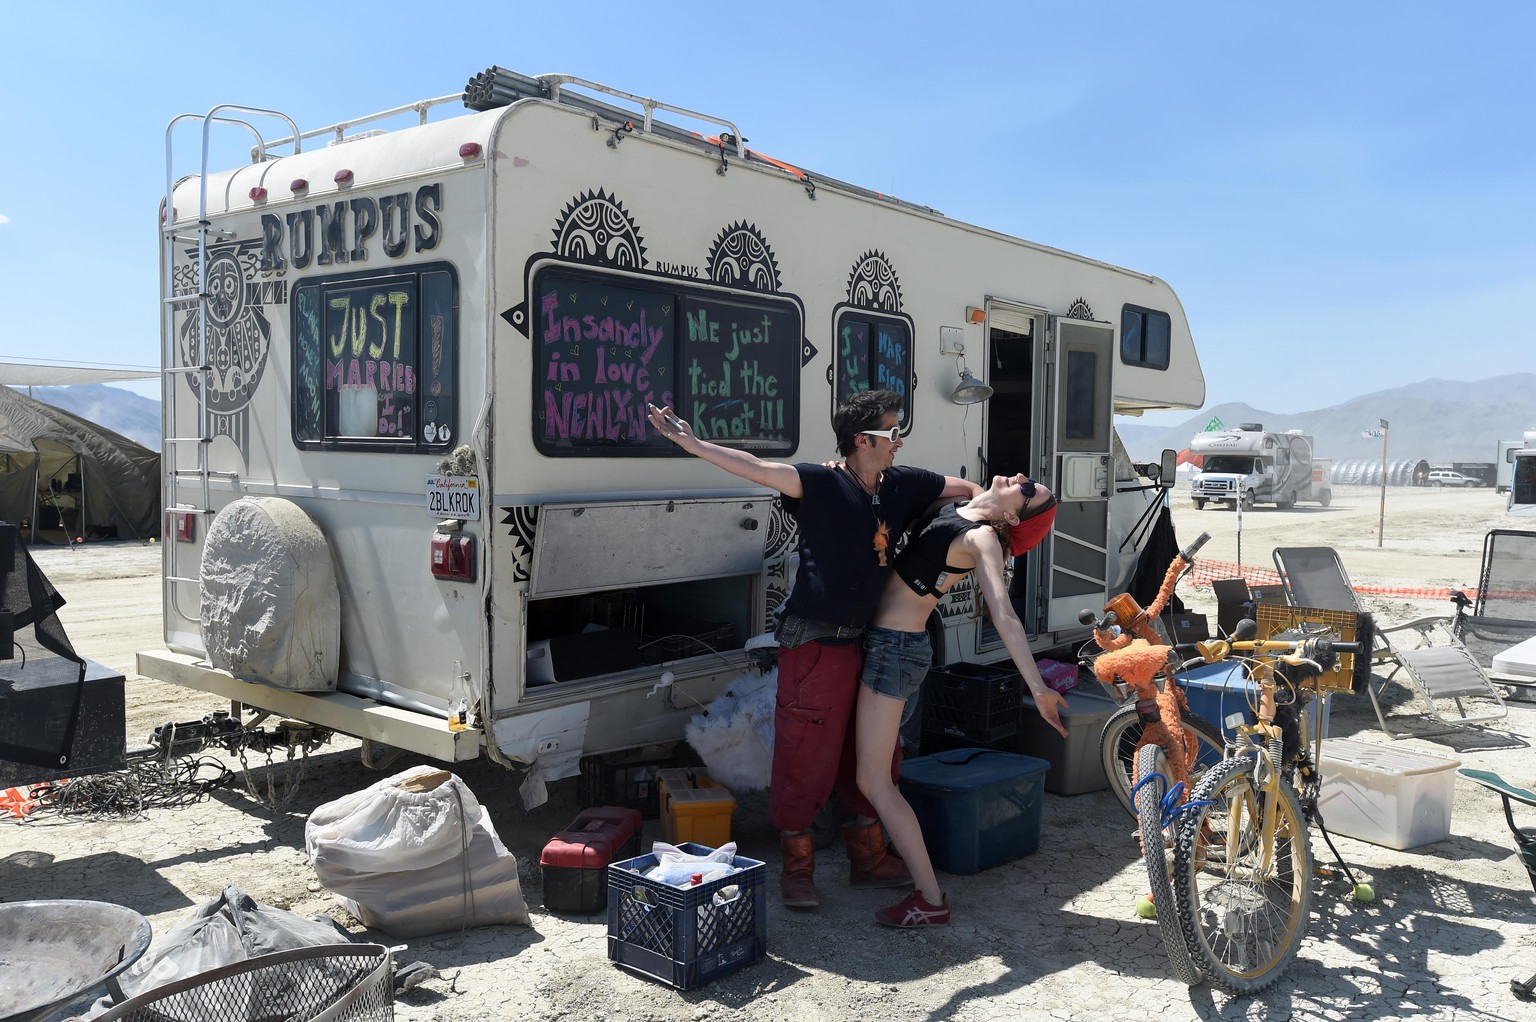 Eric Peltier and Martha Lackritz celebrate their honeymoon at the Burning Man event on the Black Rock Desert in Gerlach, Nev., on Aug. 24, 2014, a day before the event opens to ticket holders. (AP Pho ...